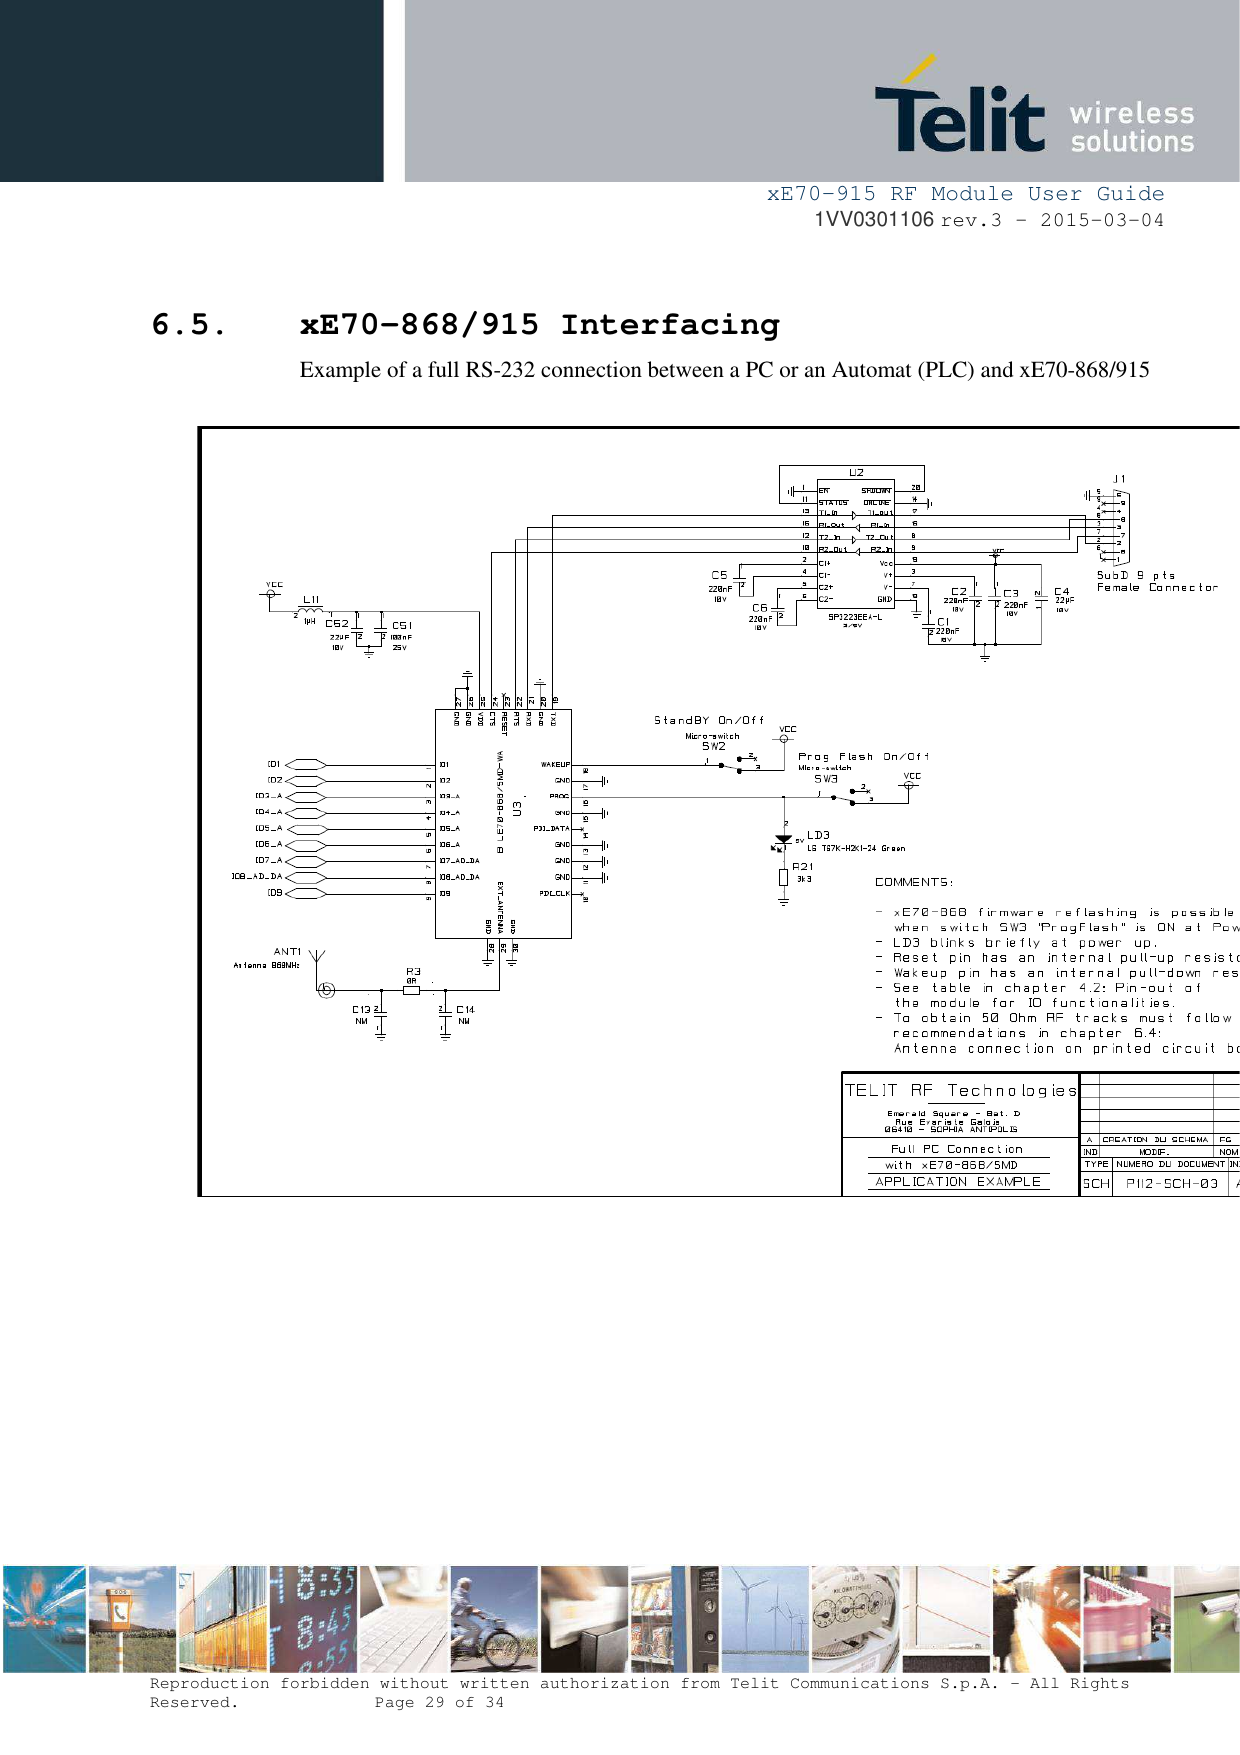     xE70-915 RF Module User Guide 1VV0301106 rev.3 – 2015-03-04  Reproduction forbidden without written authorization from Telit Communications S.p.A. - All Rights Reserved.    Page 29 of 34   6.5. xE70-868/915 Interfacing Example of a full RS-232 connection between a PC or an Automat (PLC) and xE70-868/915    